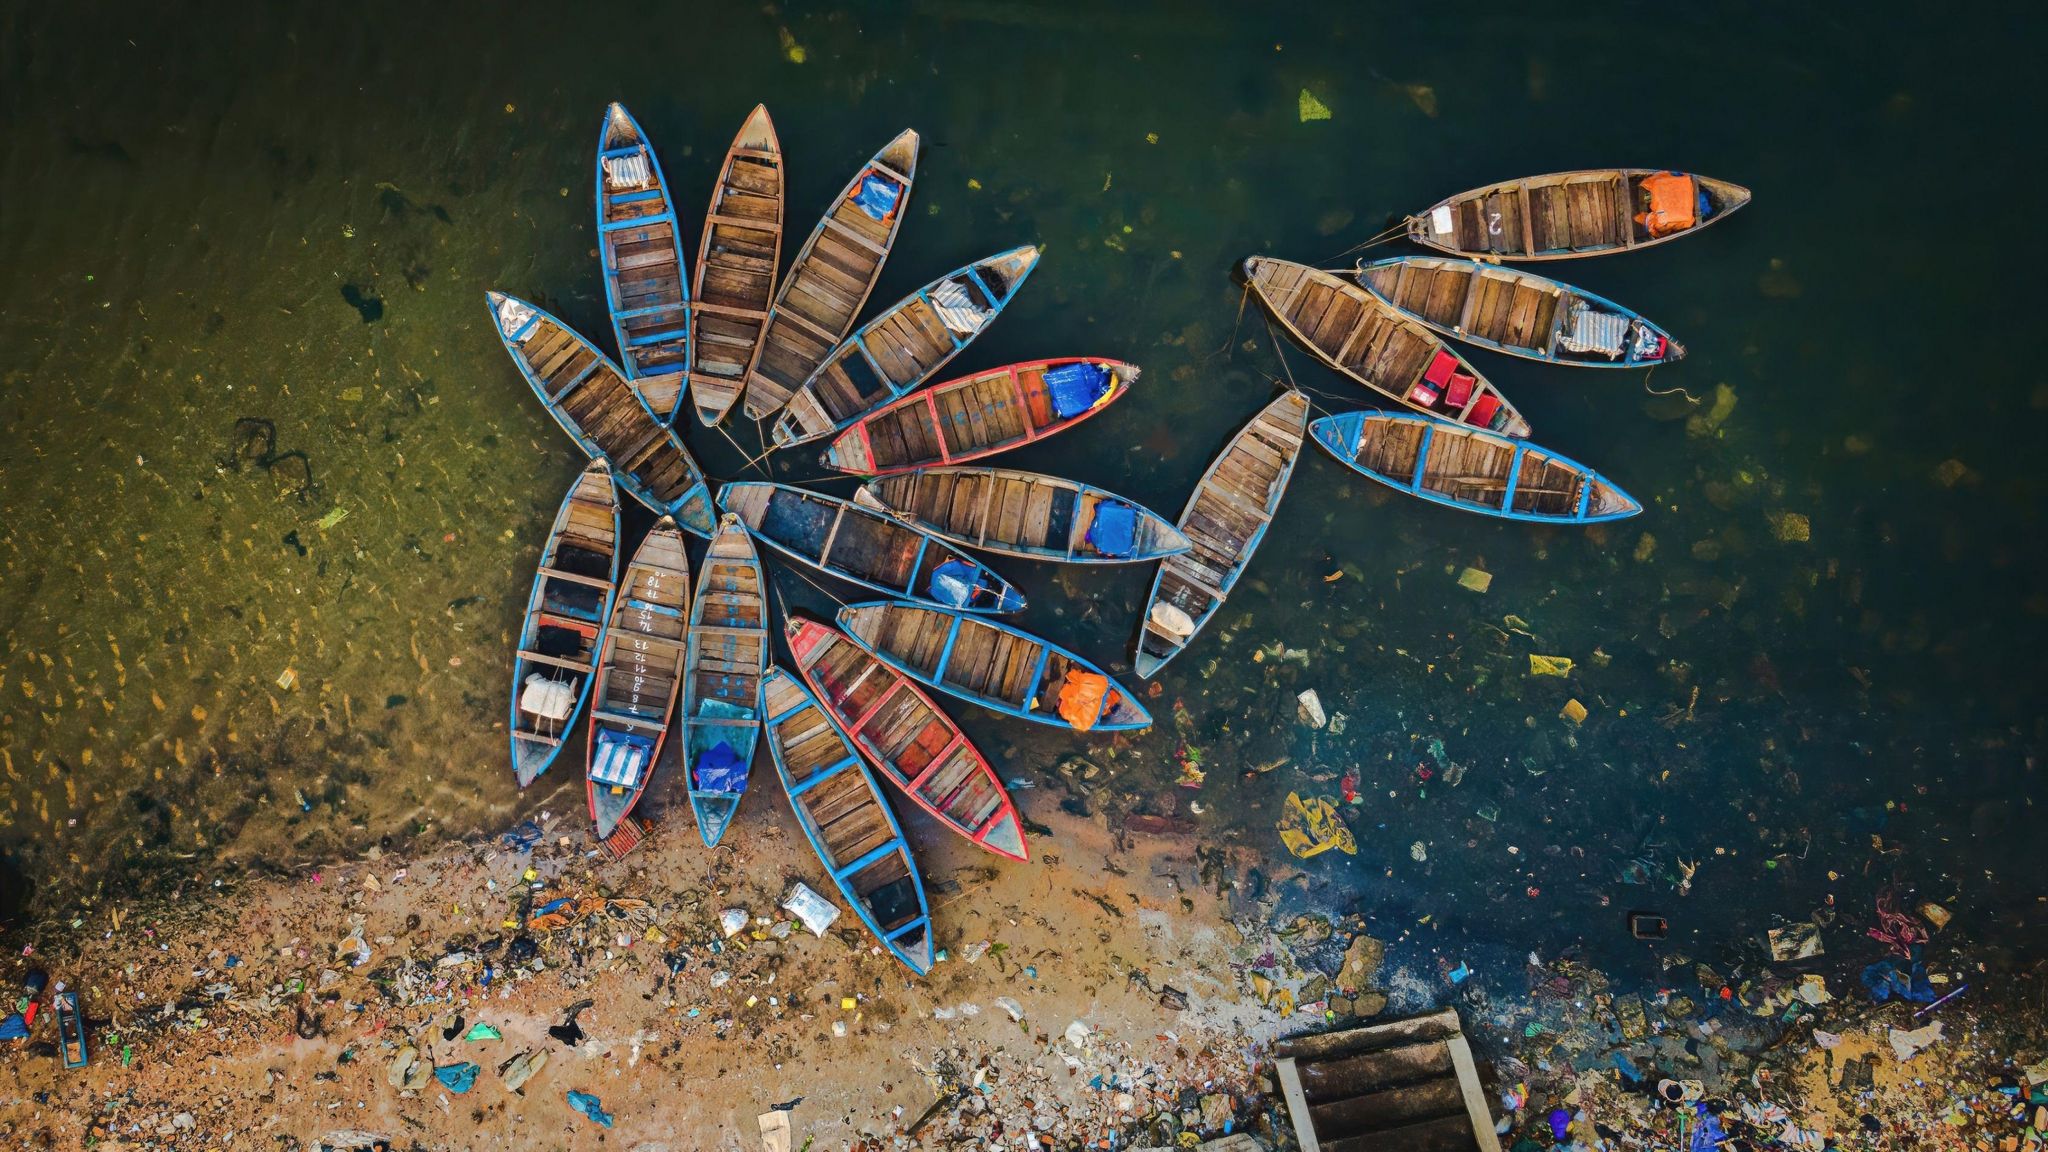 Alex Cao's photo 'Boat flower in pollution', which shows an aerial view of a number of wooden boats tethered together and floating so they resemble petals. The water and beach is shown covered in pollution. 